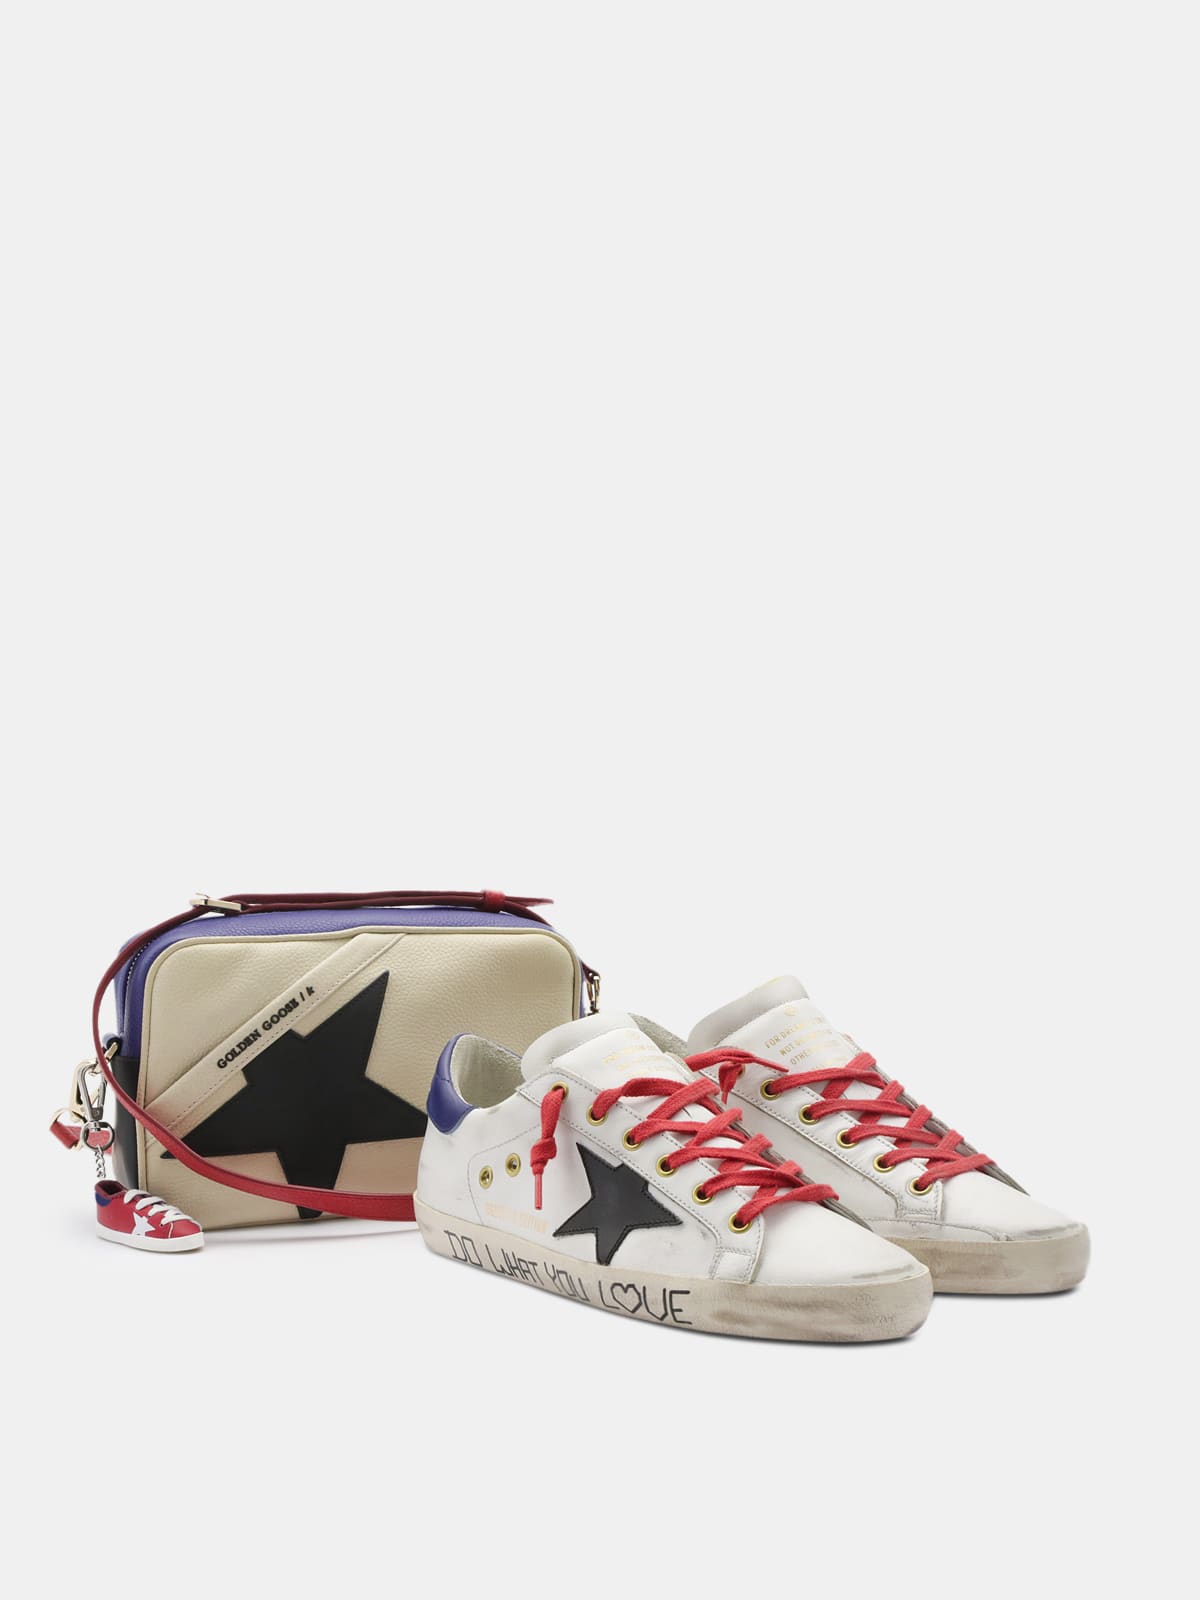 Golden Goose - Super-Star sneakers in white leather with black star and blue heel tab in 